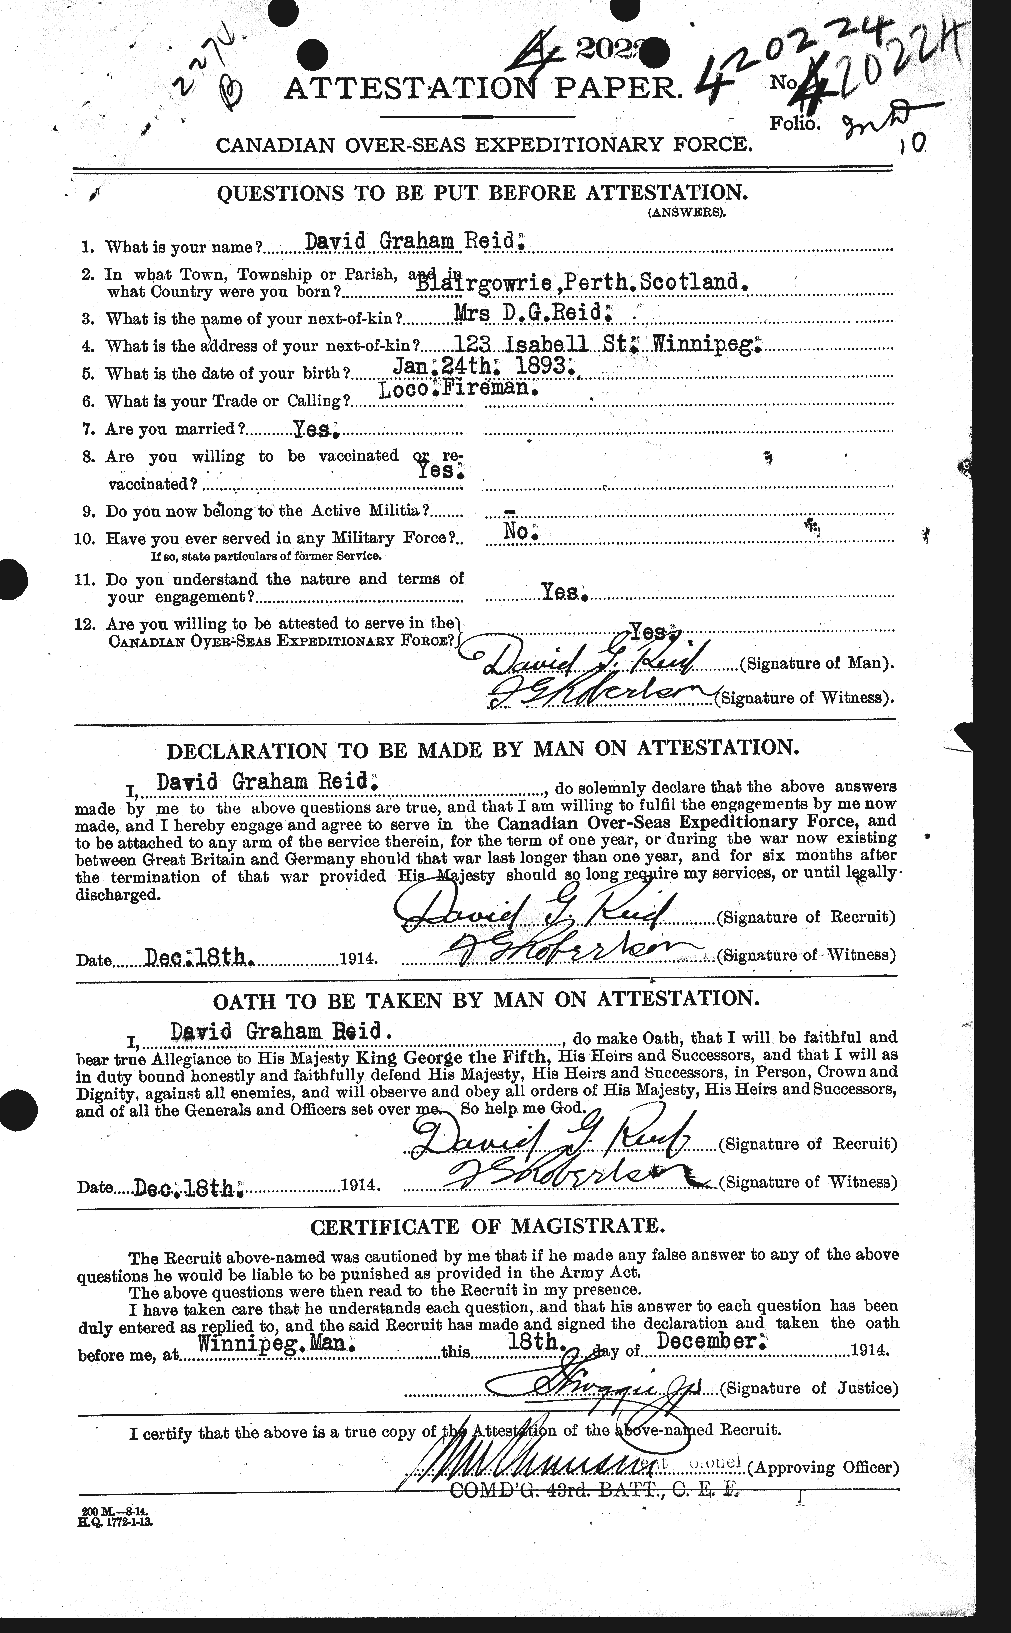 Personnel Records of the First World War - CEF 200181a